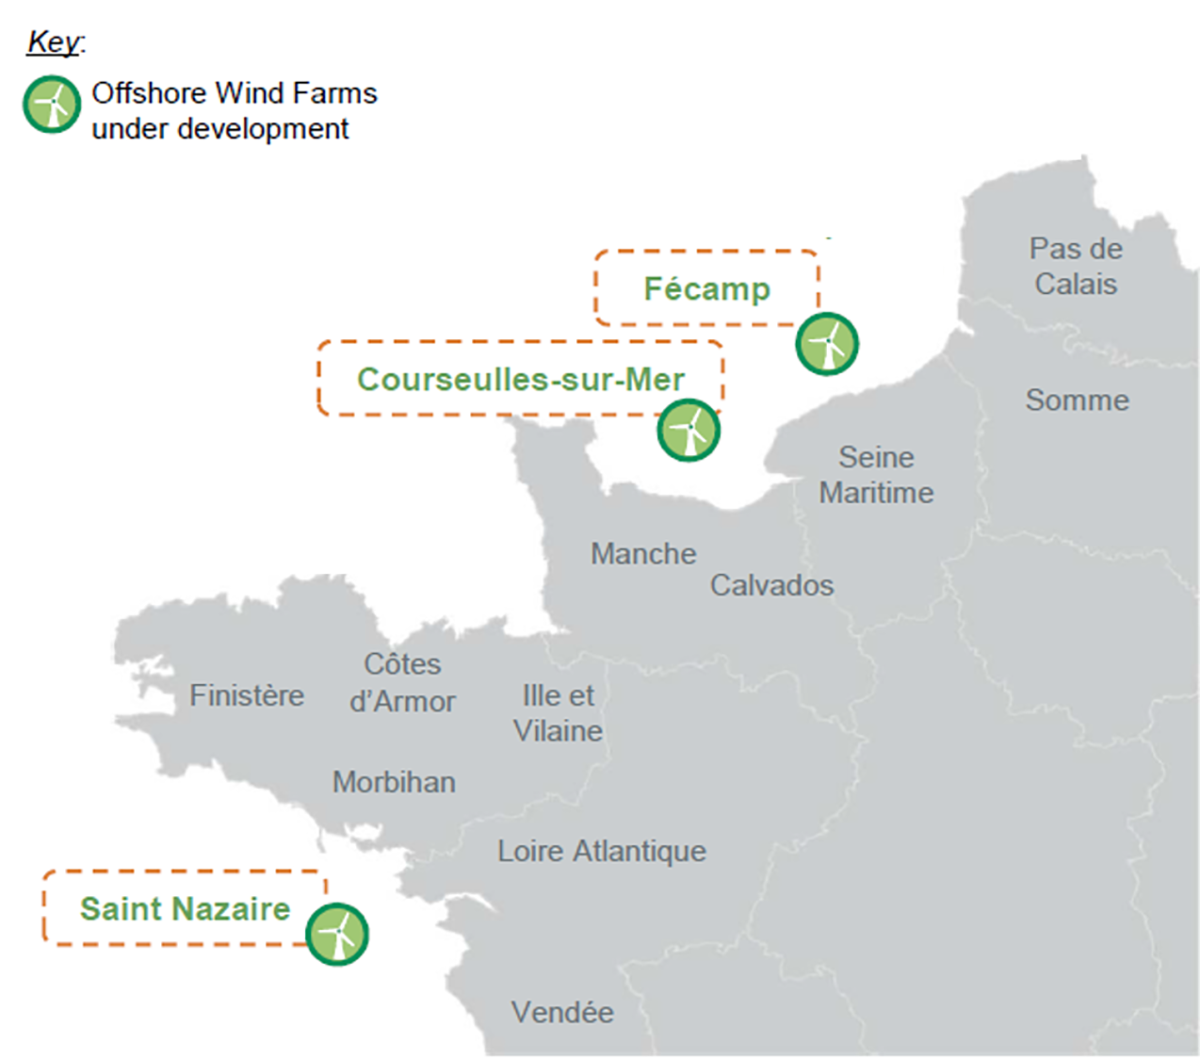 A map showing locations ofthree Frensh offshore wind farms, including Fecamp